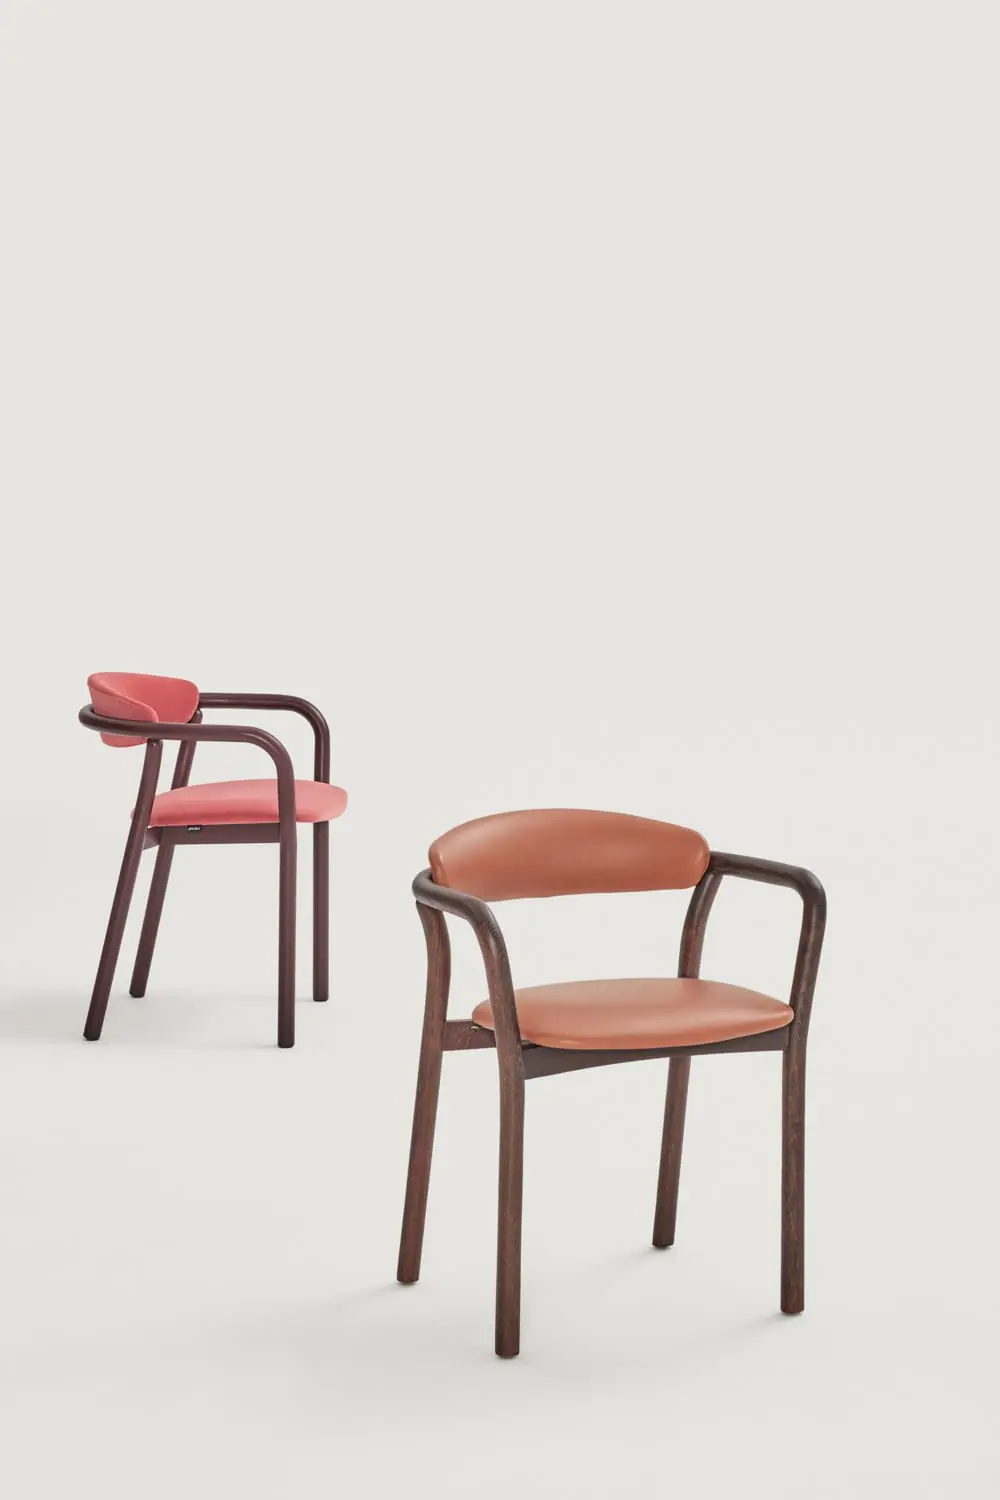 capdell-cecile-chair-01